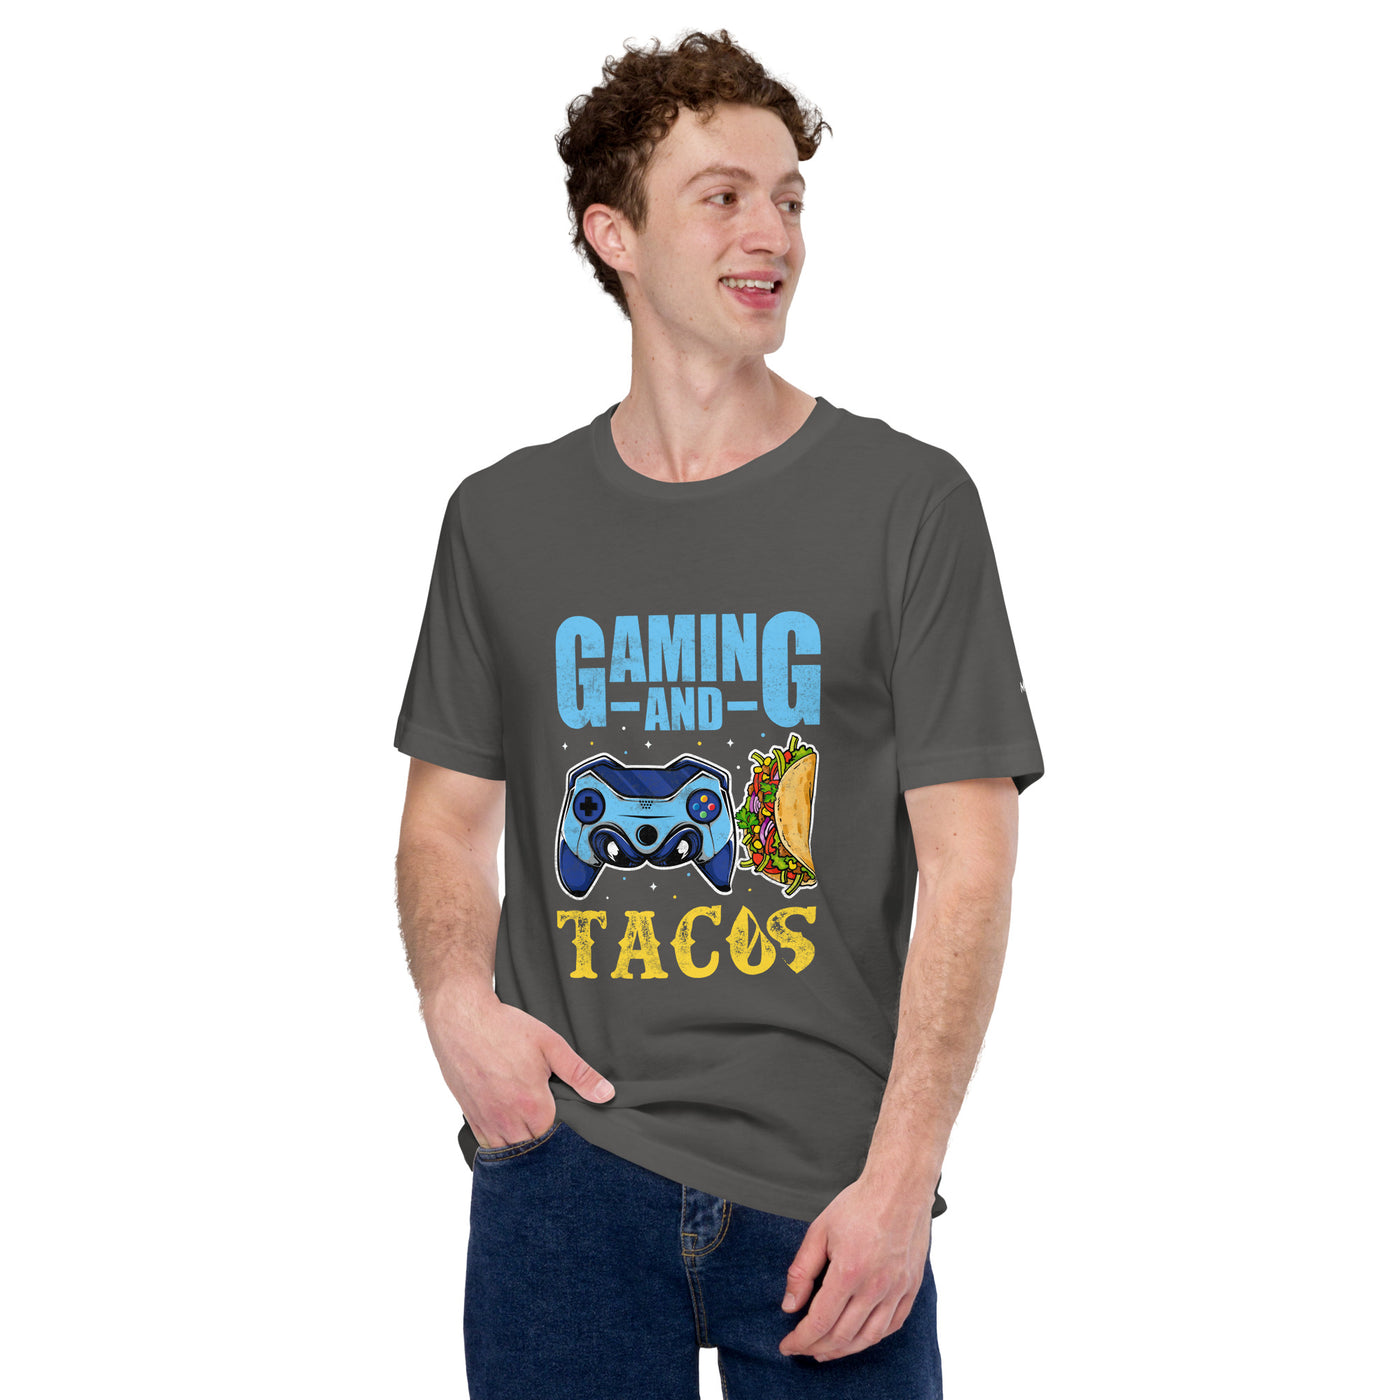 Gaming and Tacos - Unisex t-shirt